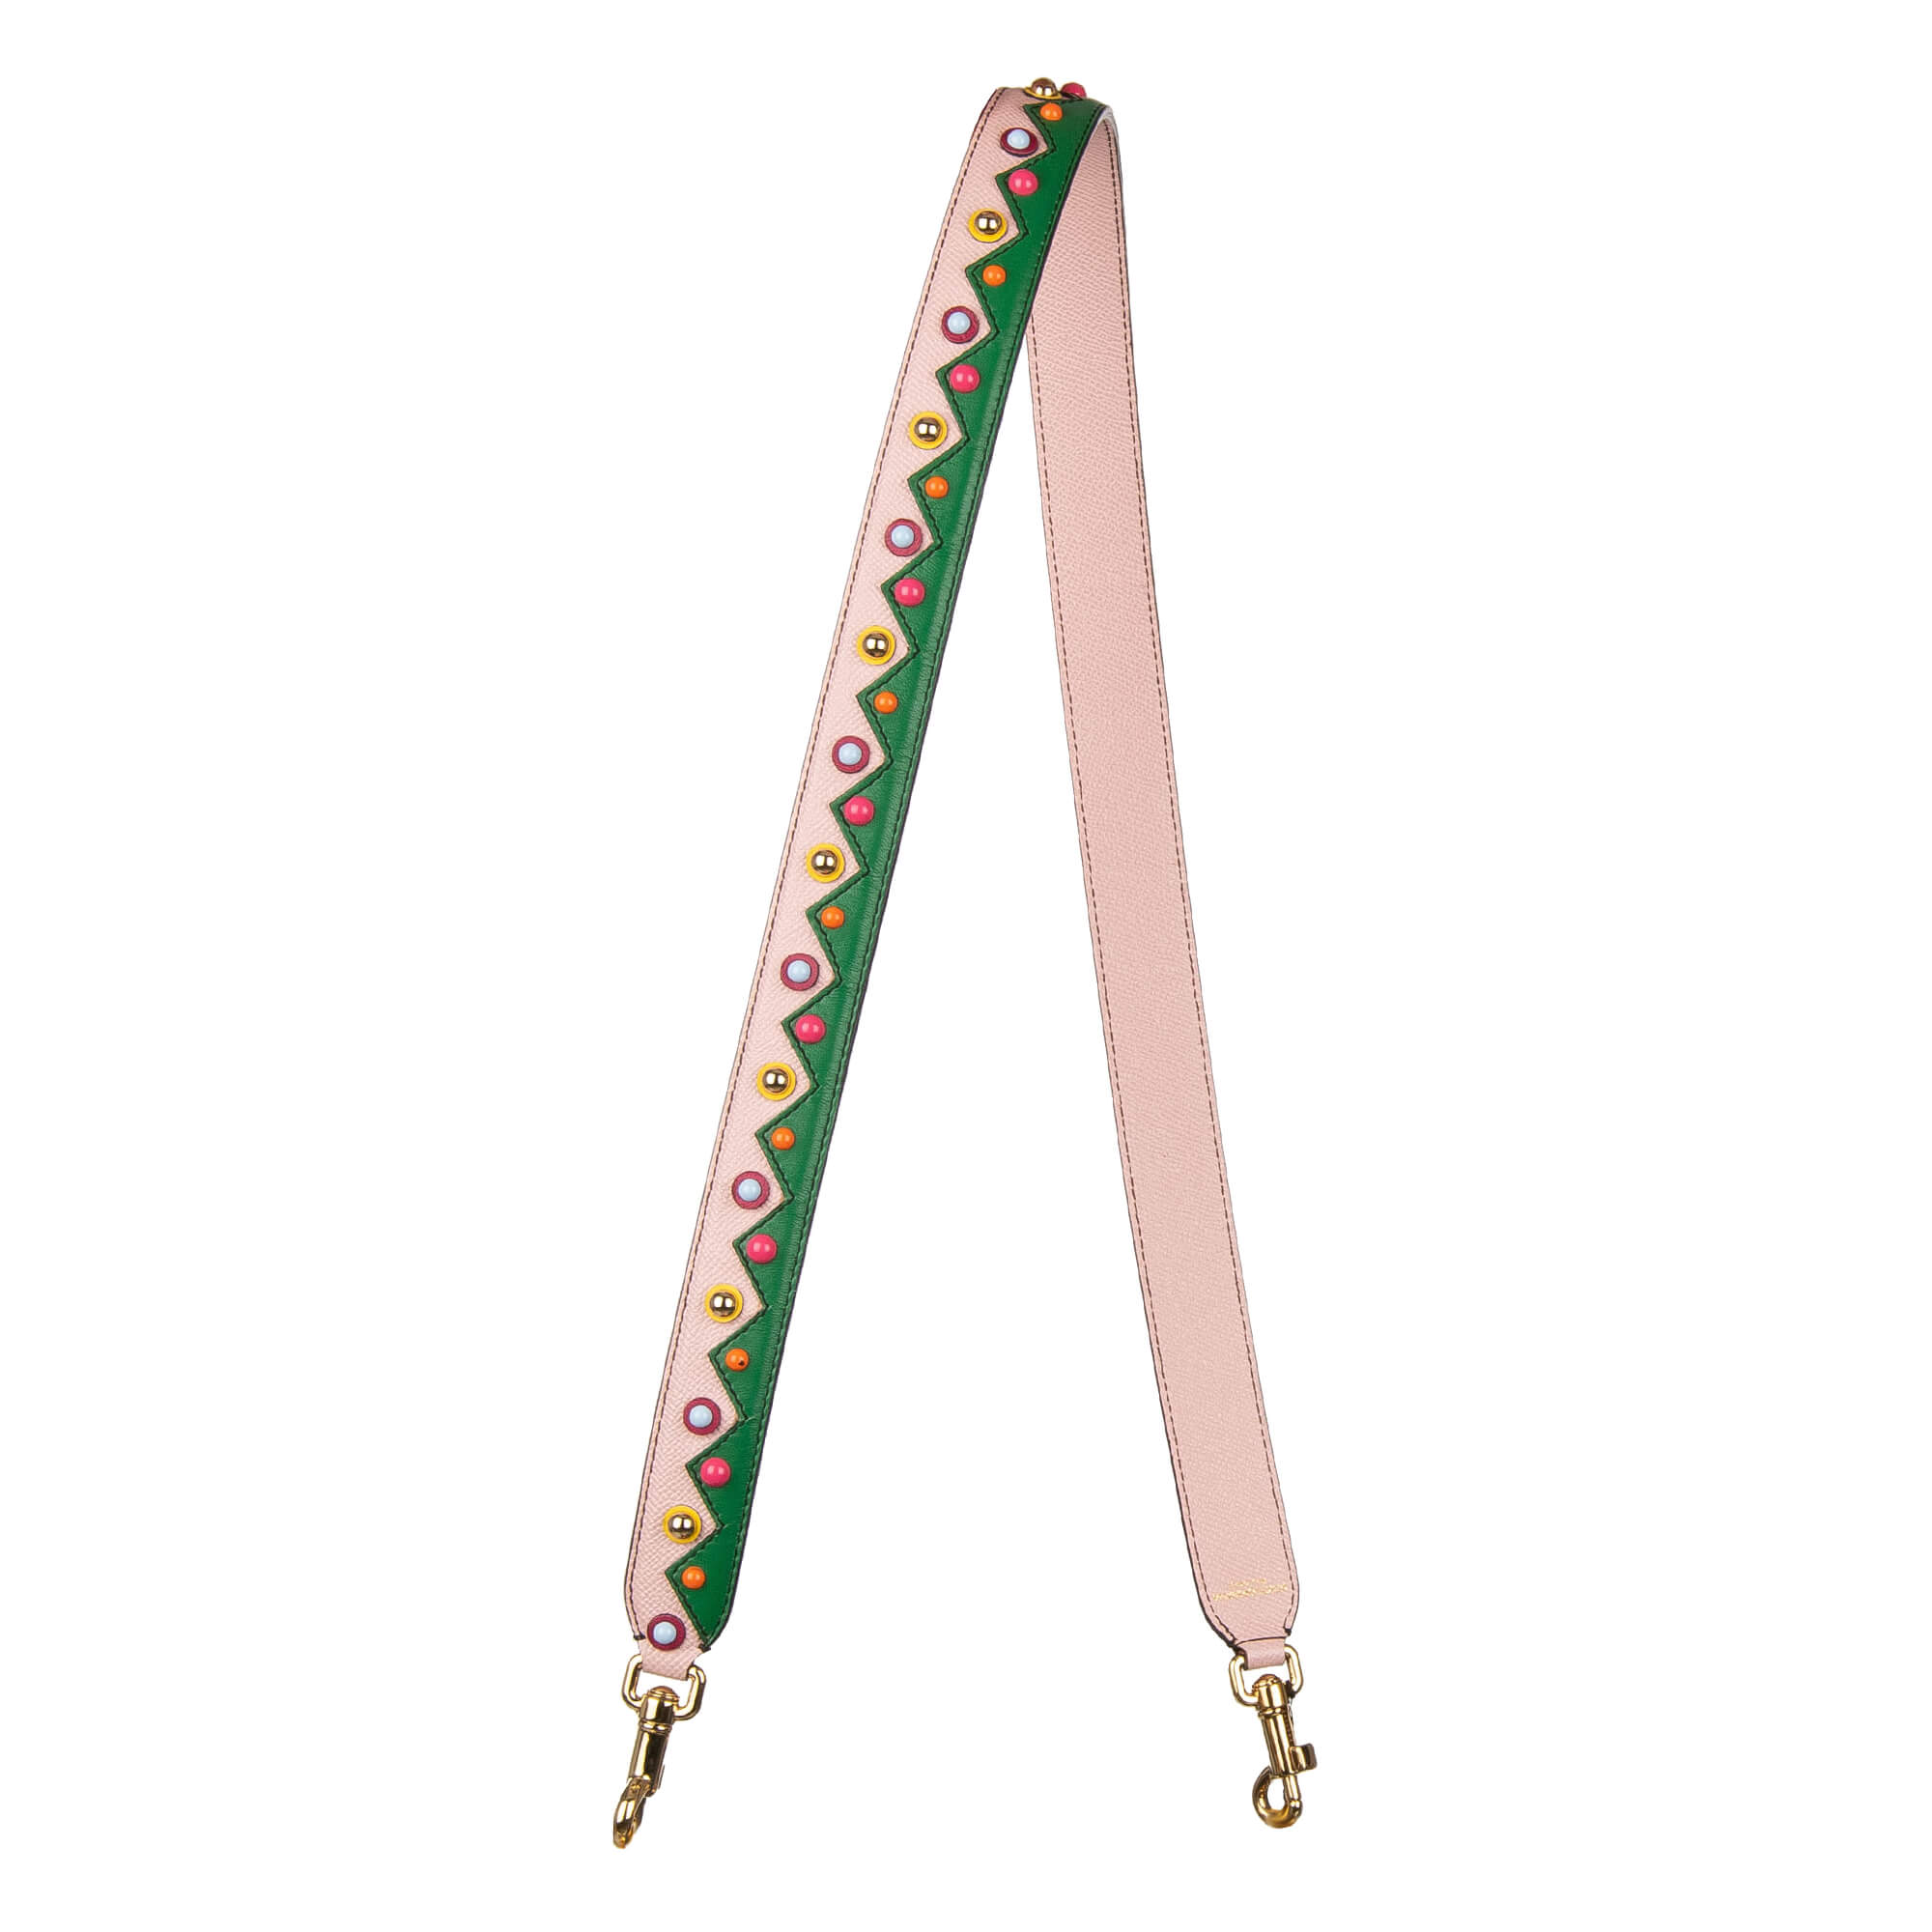 World Record Guinness Book number missile Dolce & Gabbana Studded Leather Bag Strap Handle Pink Green Gold | FASHION  ROOMS